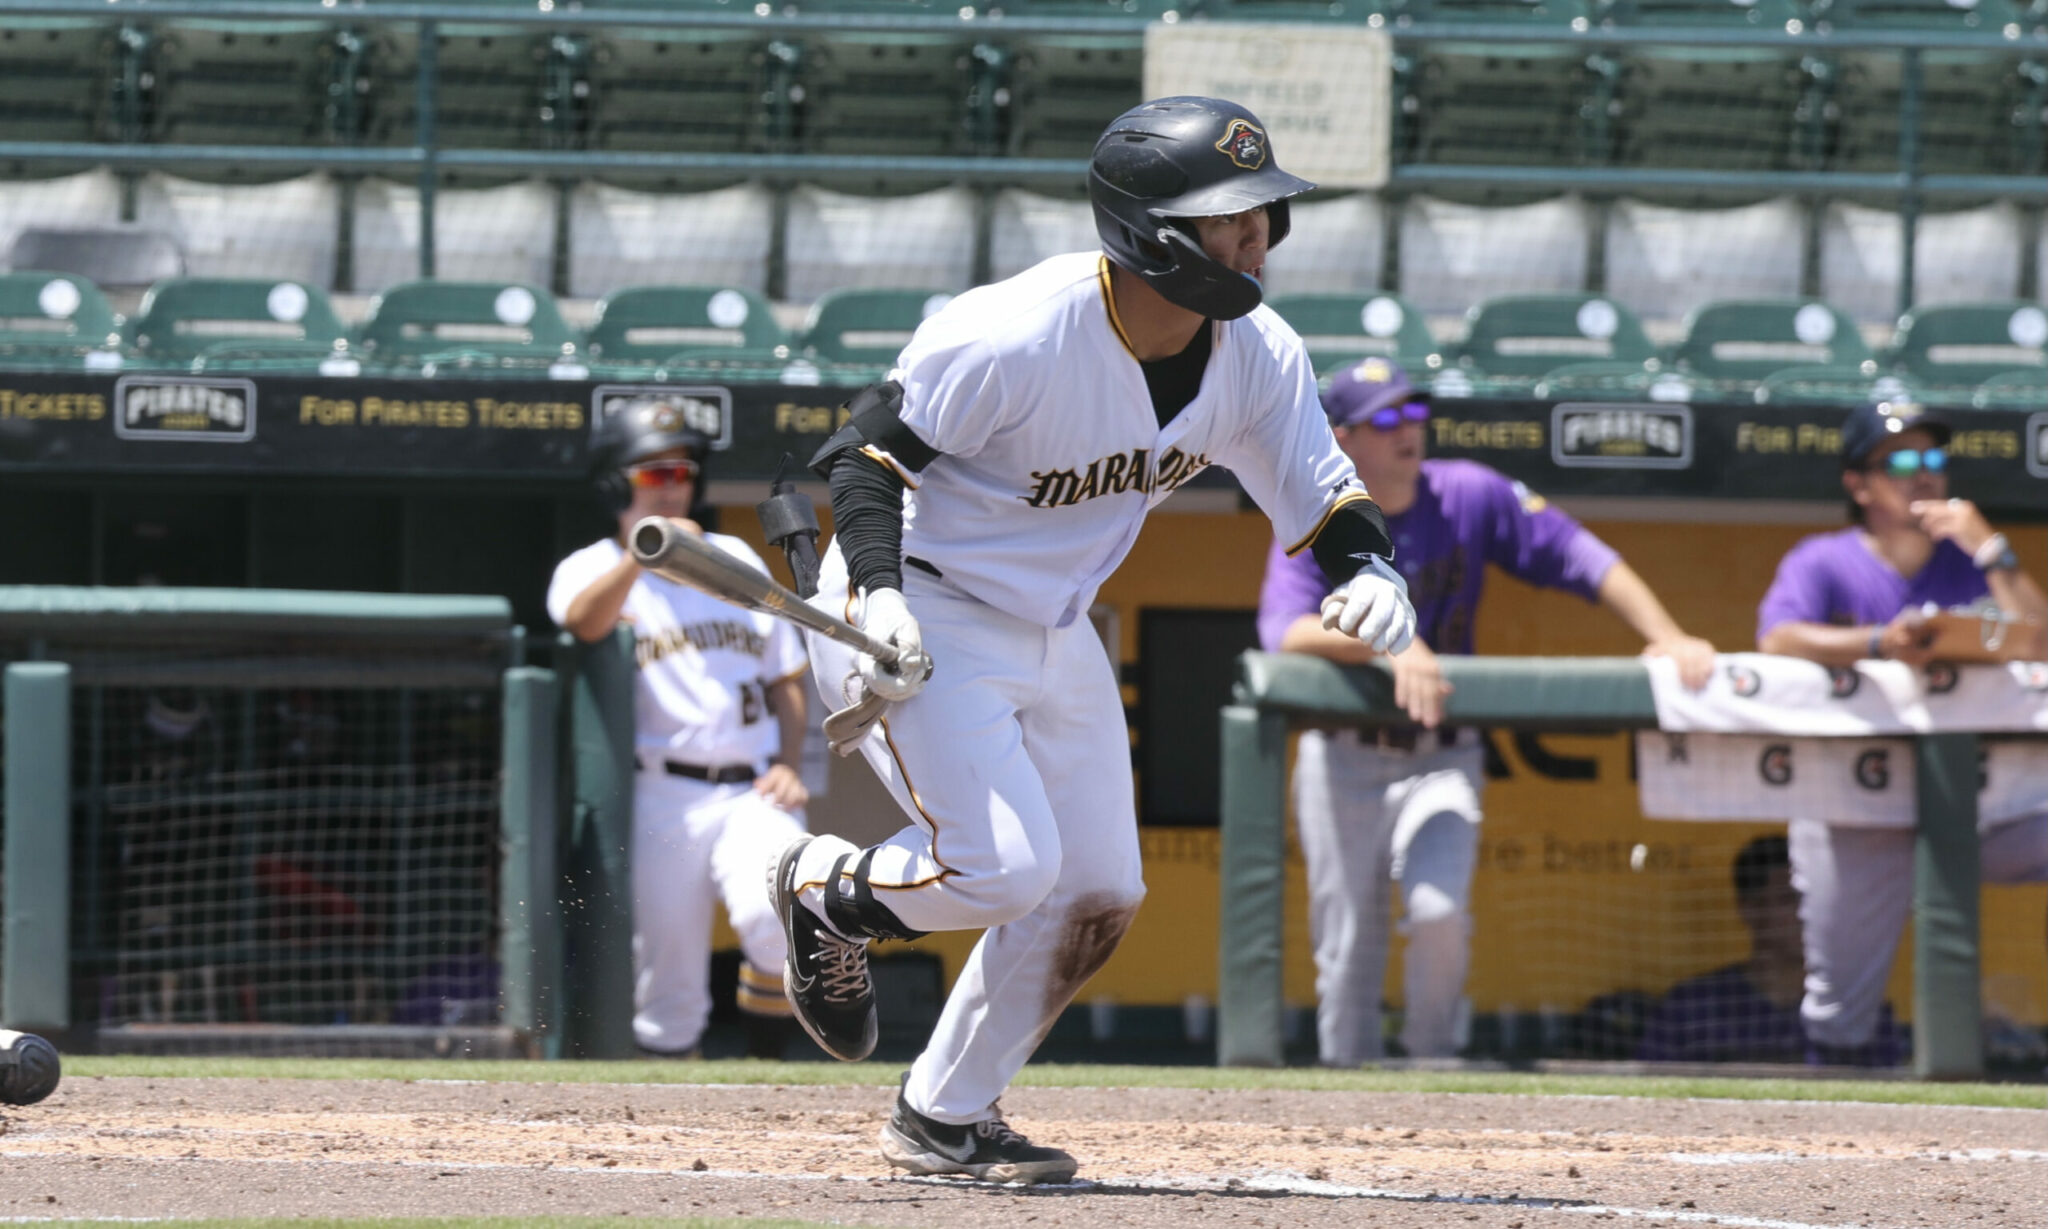 Pirates Prospects Daily: Tsung-Che Cheng and Consistency